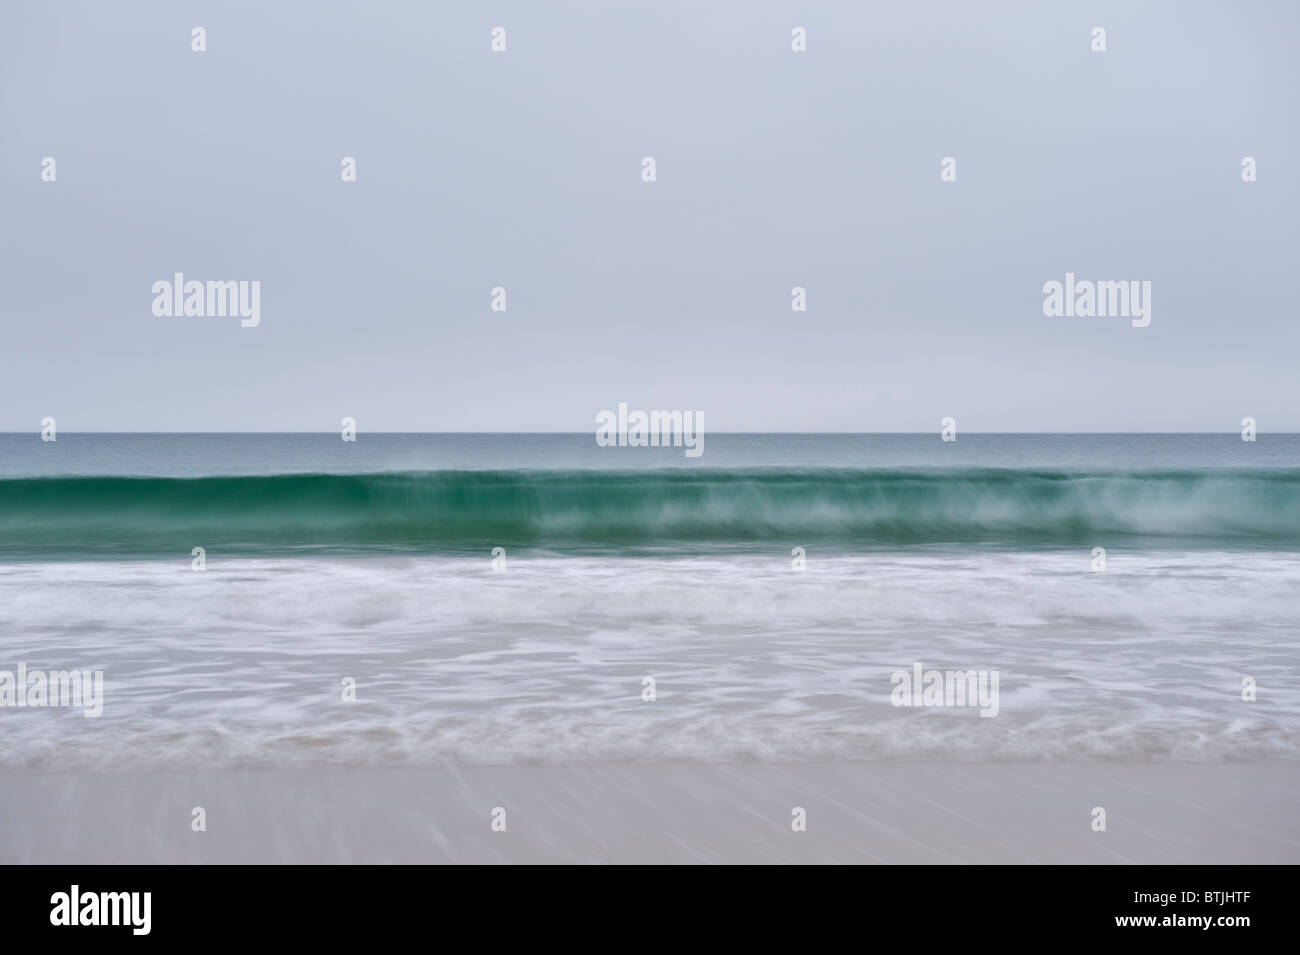 Abstract image of breaking wave in misty weather, Luskentyre beach, Isle of Harris, Outer Hebrides, Scotland Stock Photo